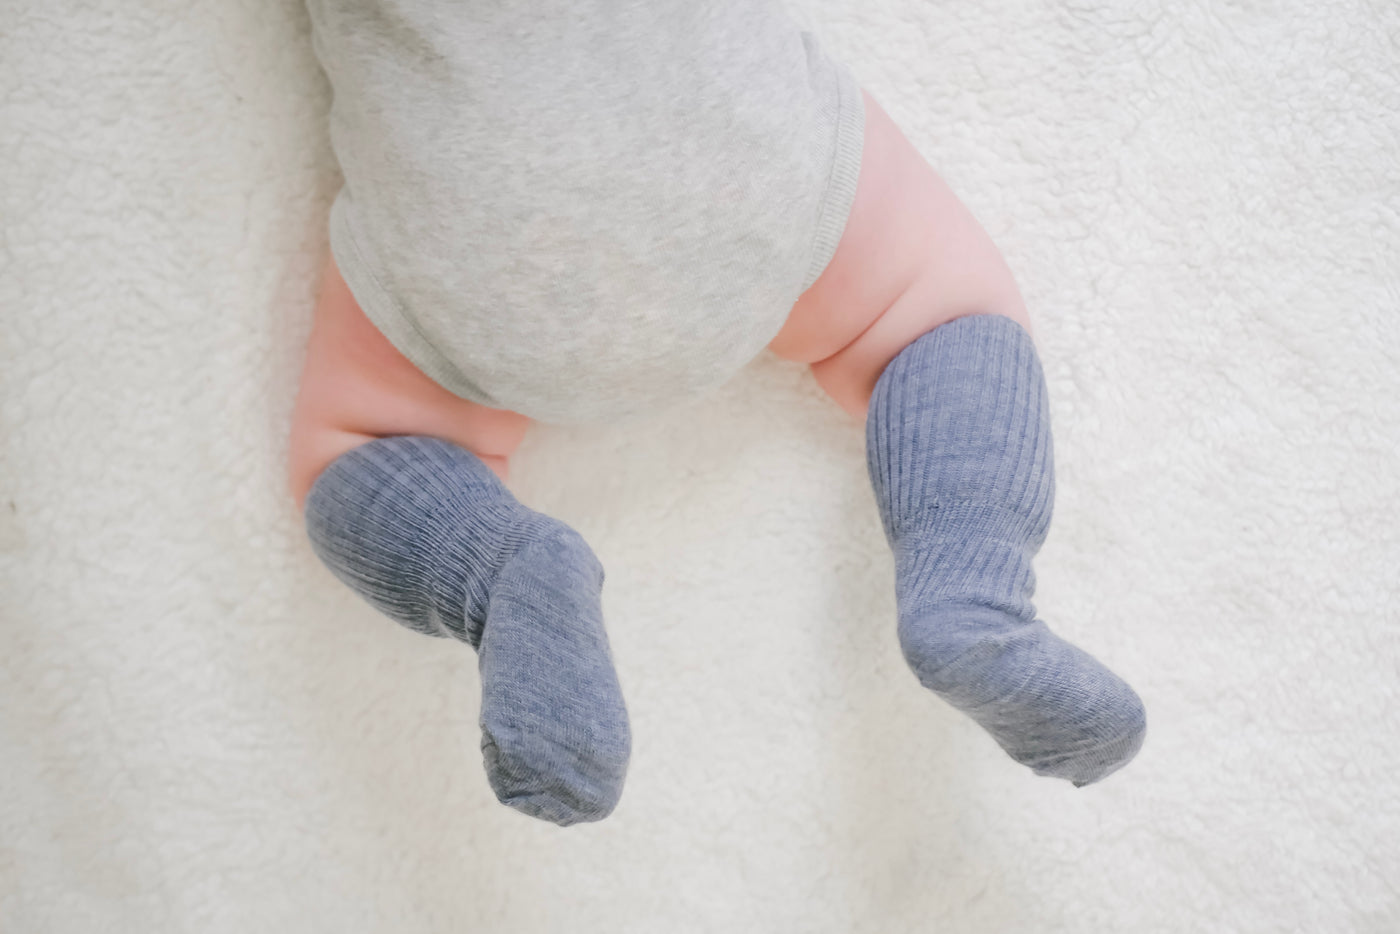 Wool Socks, Baby and Toddler, Blue